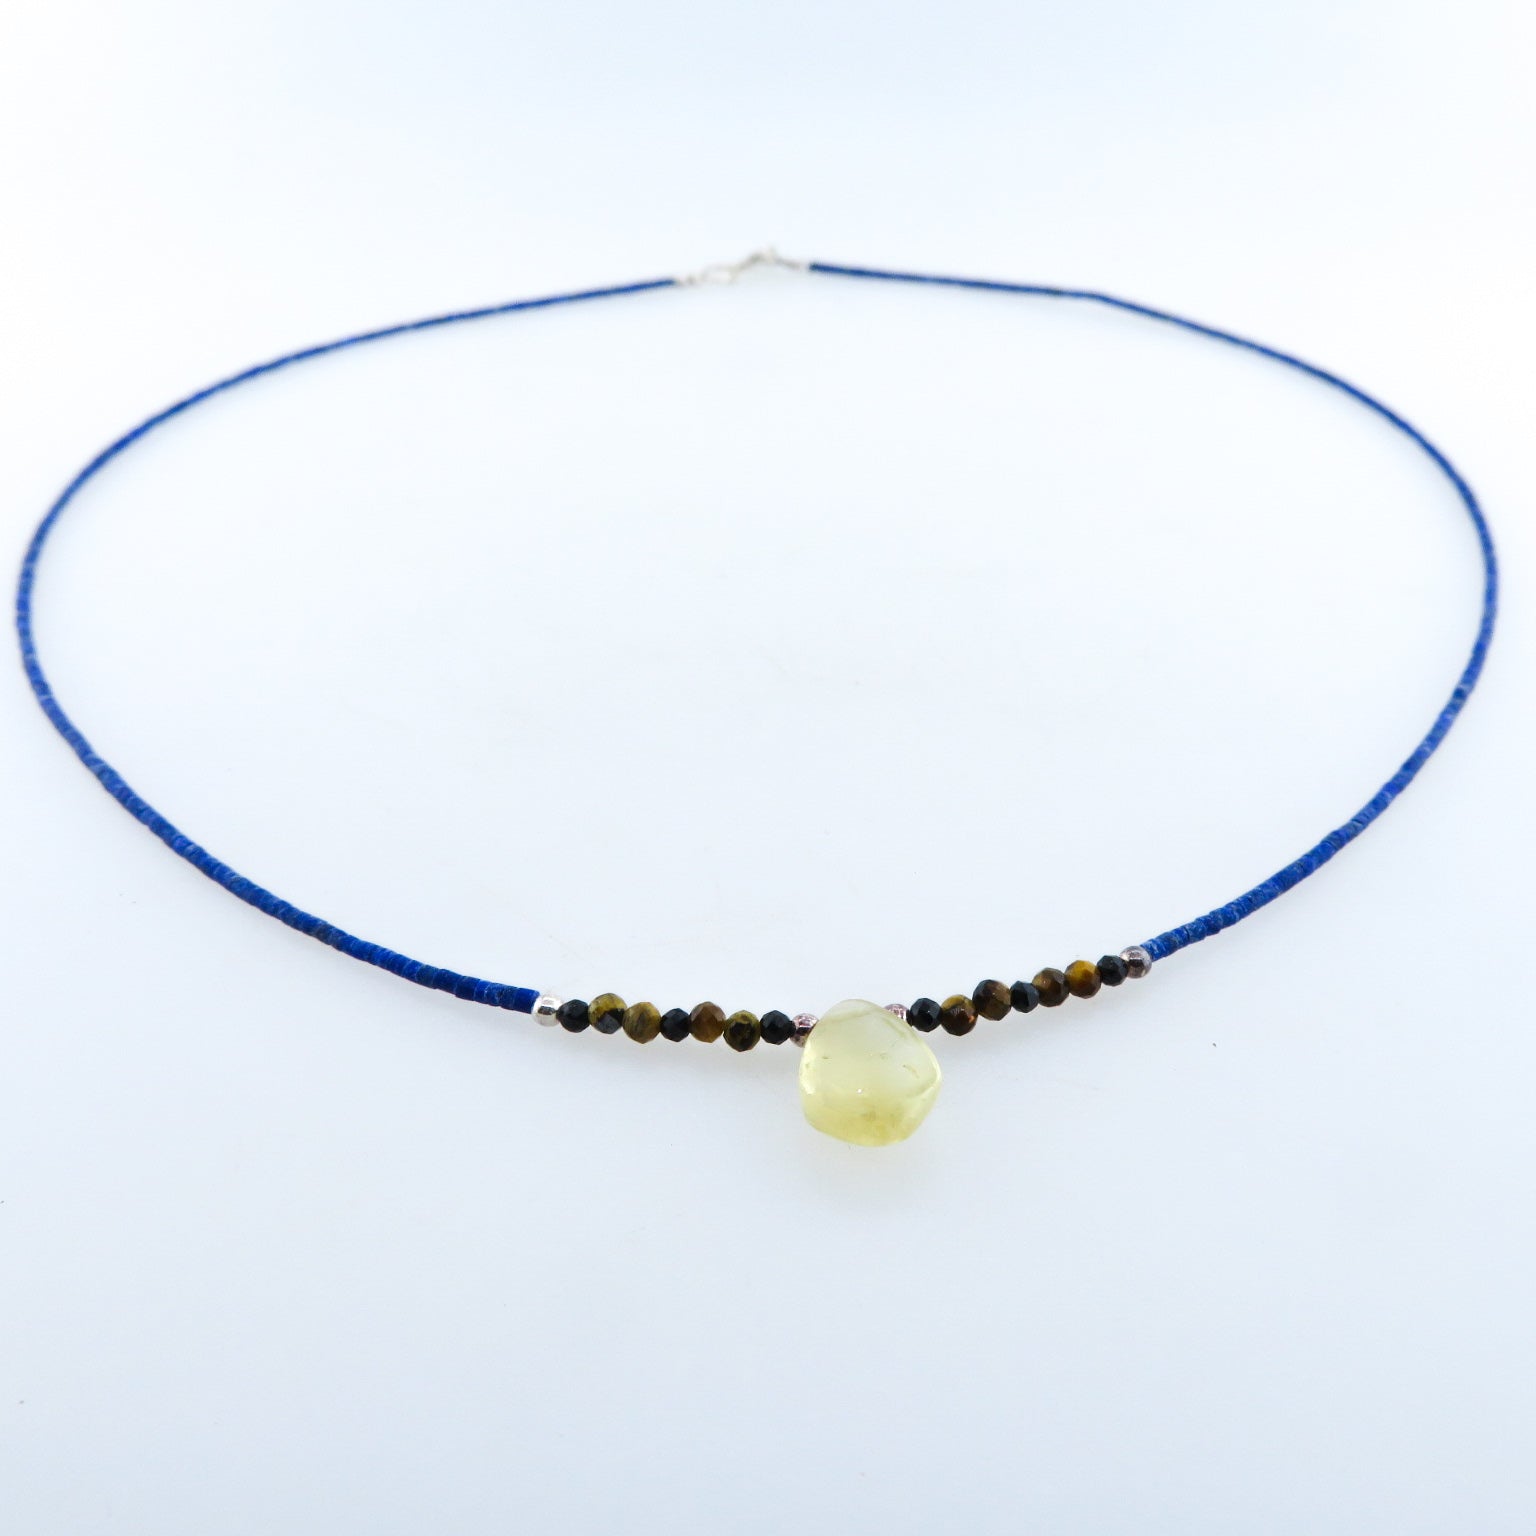 Lapis Lazuli Necklace with Citrine, Tiger's Eye, Black Onyx and Silver Brads